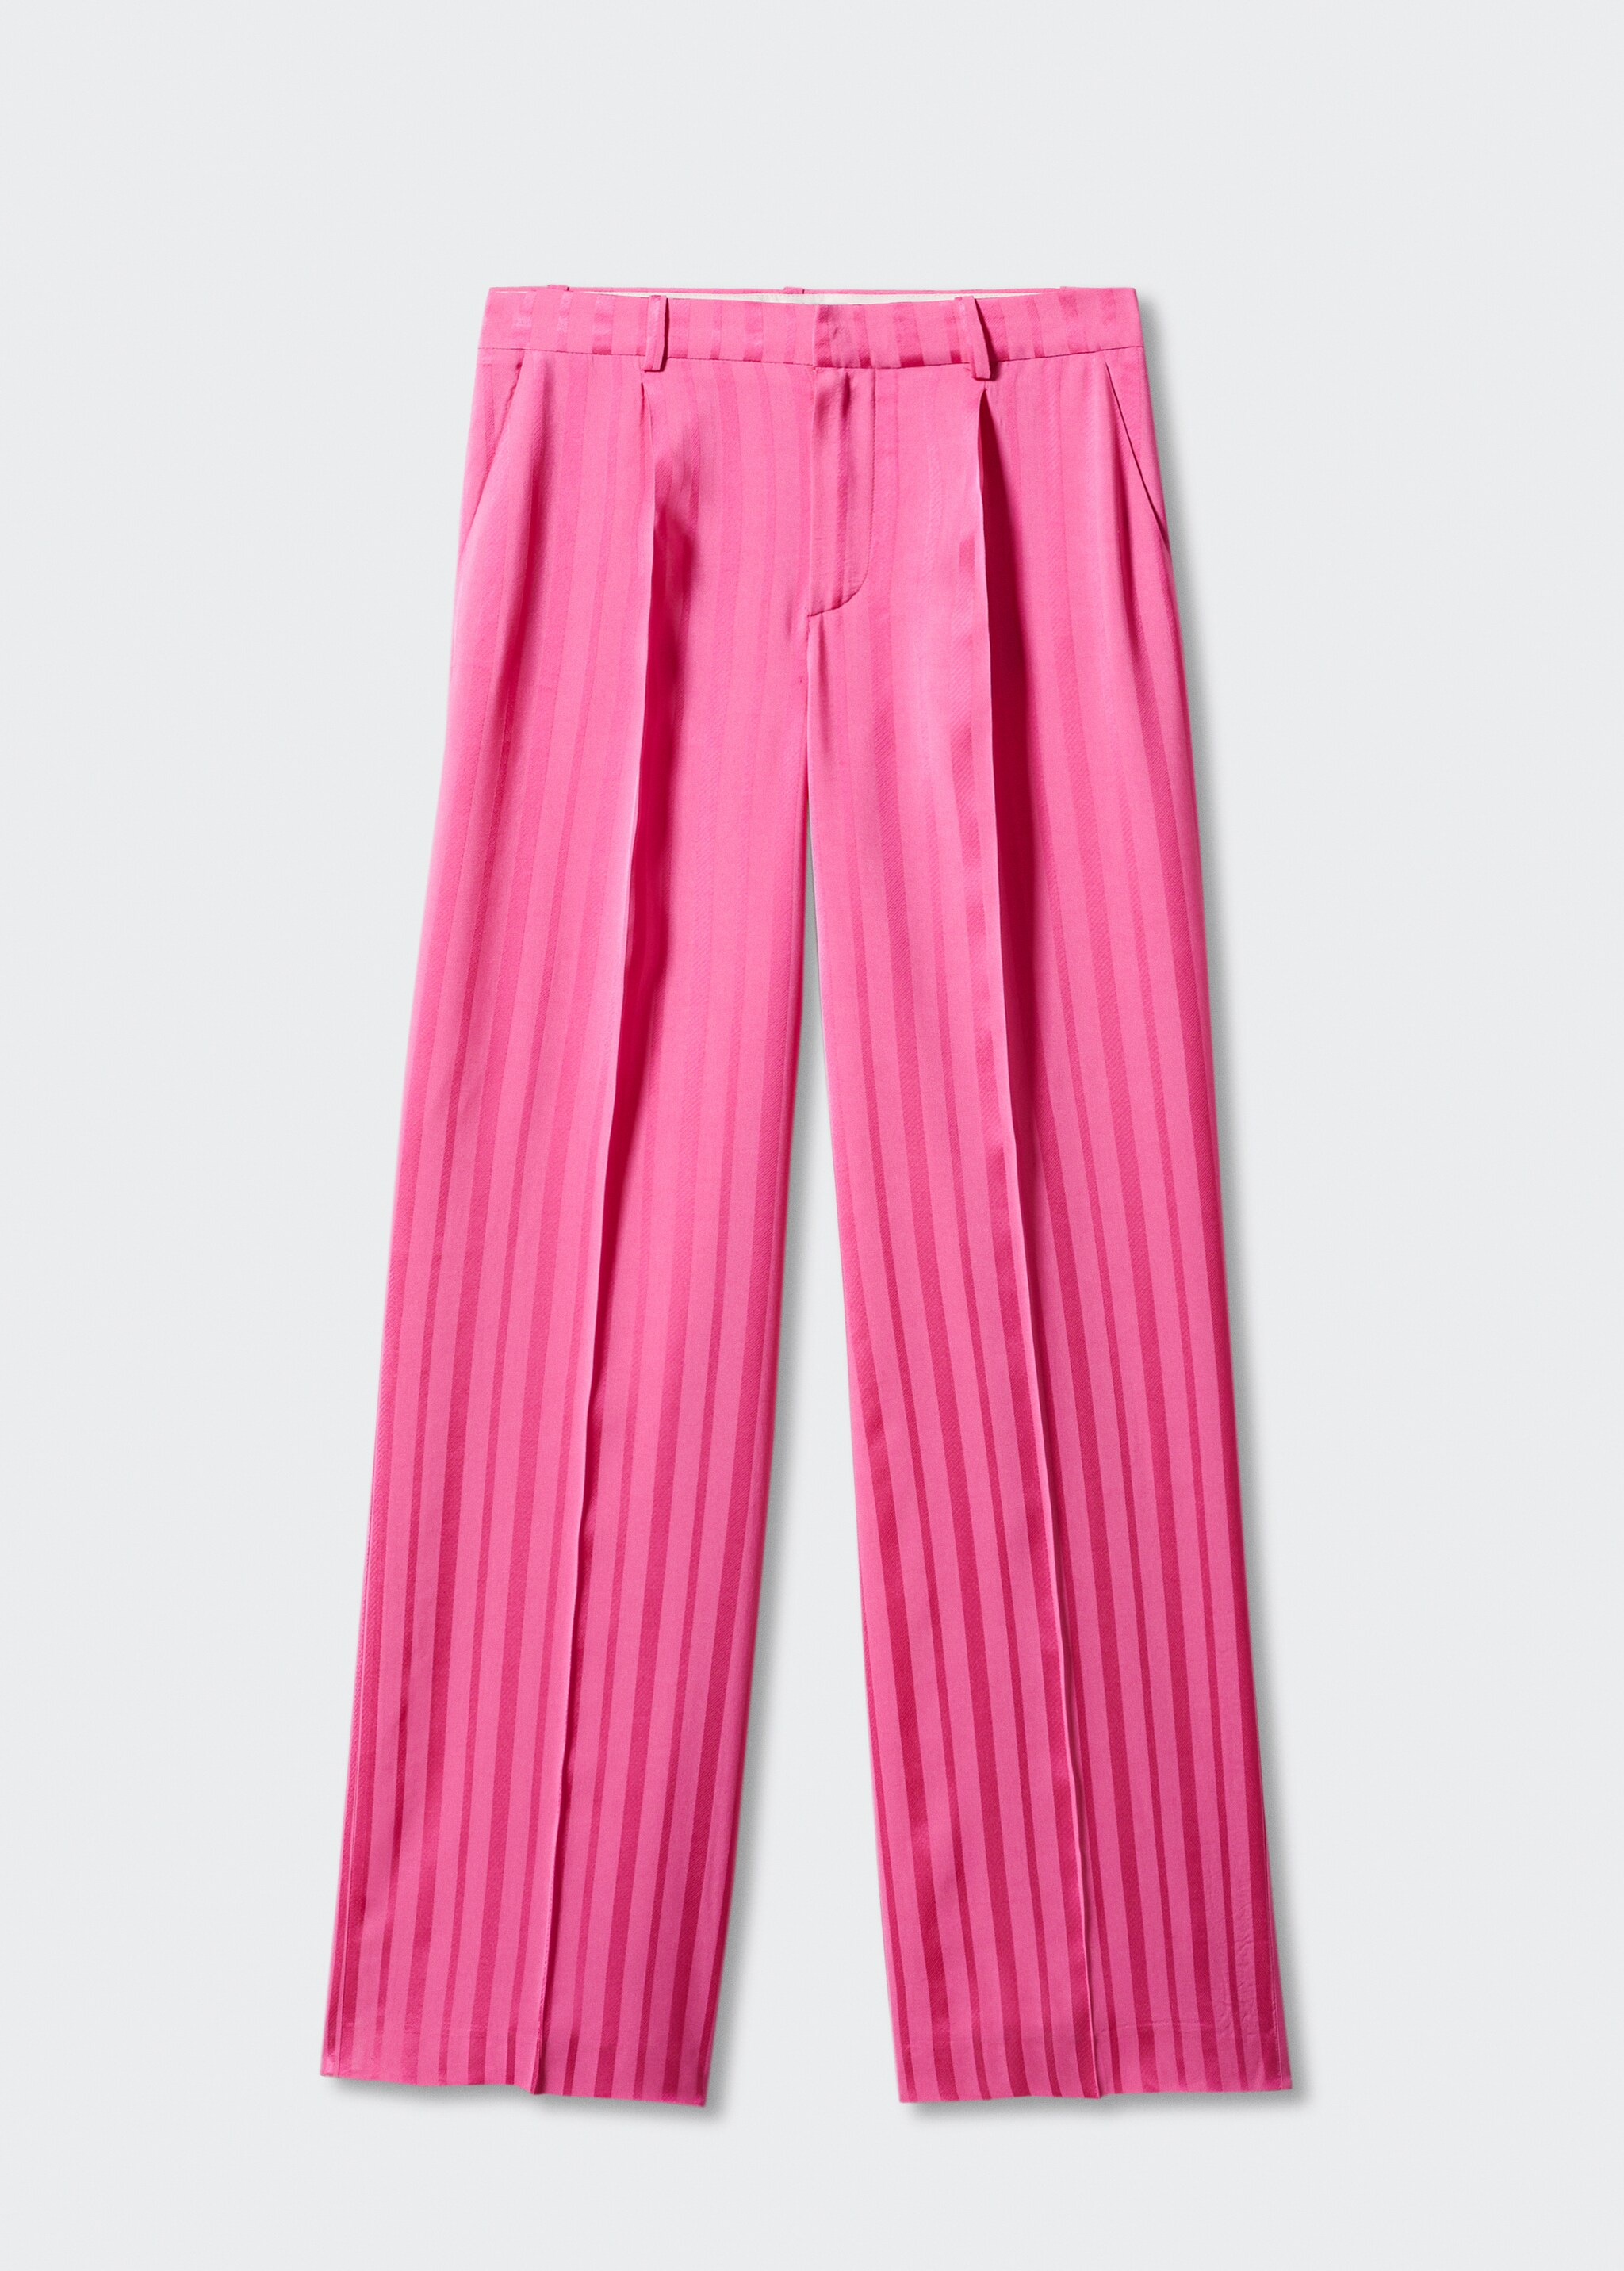 Pants with satin stripe detail - Article without model